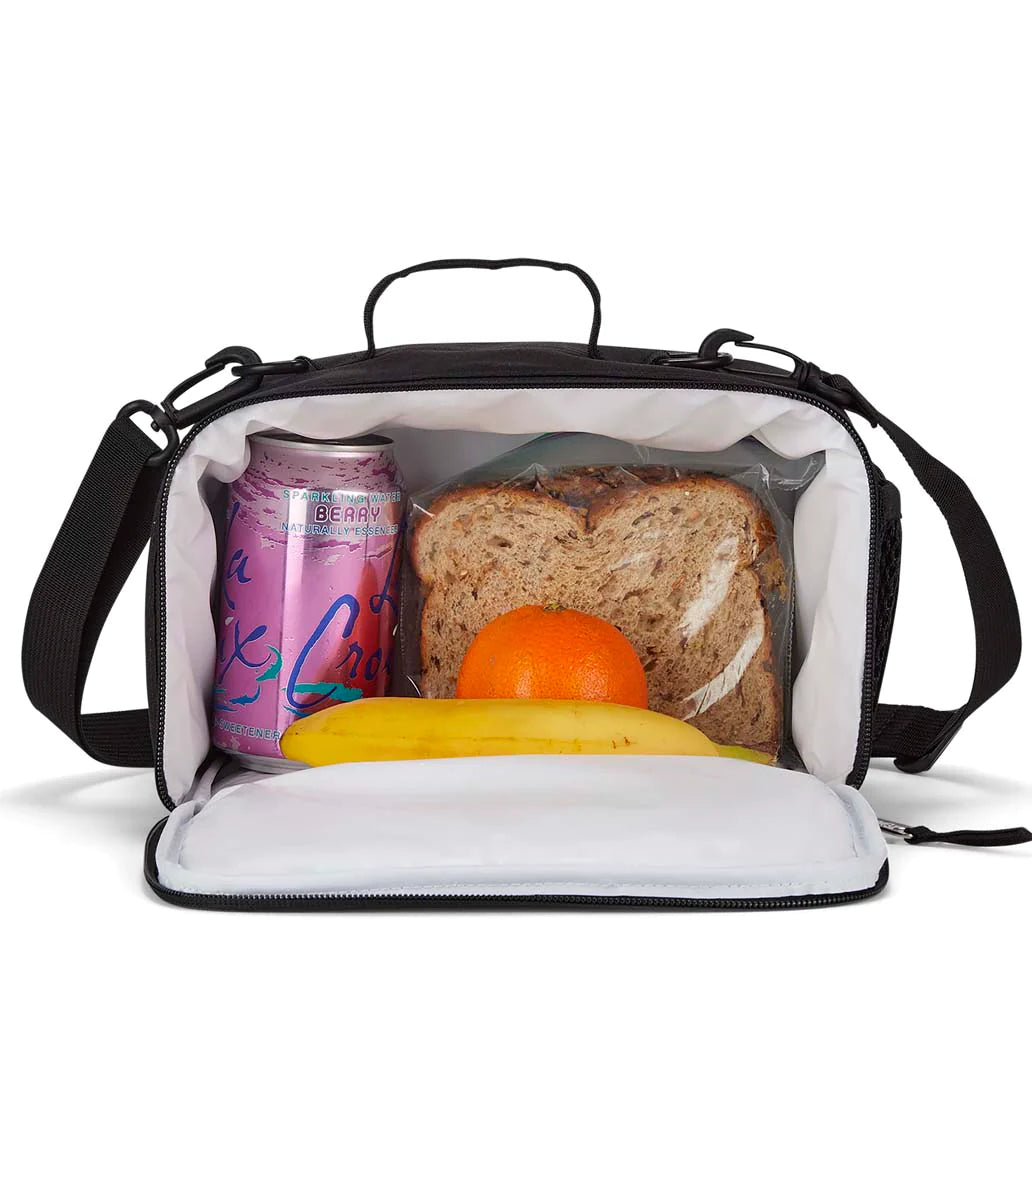 The Carryout Lunch Bag